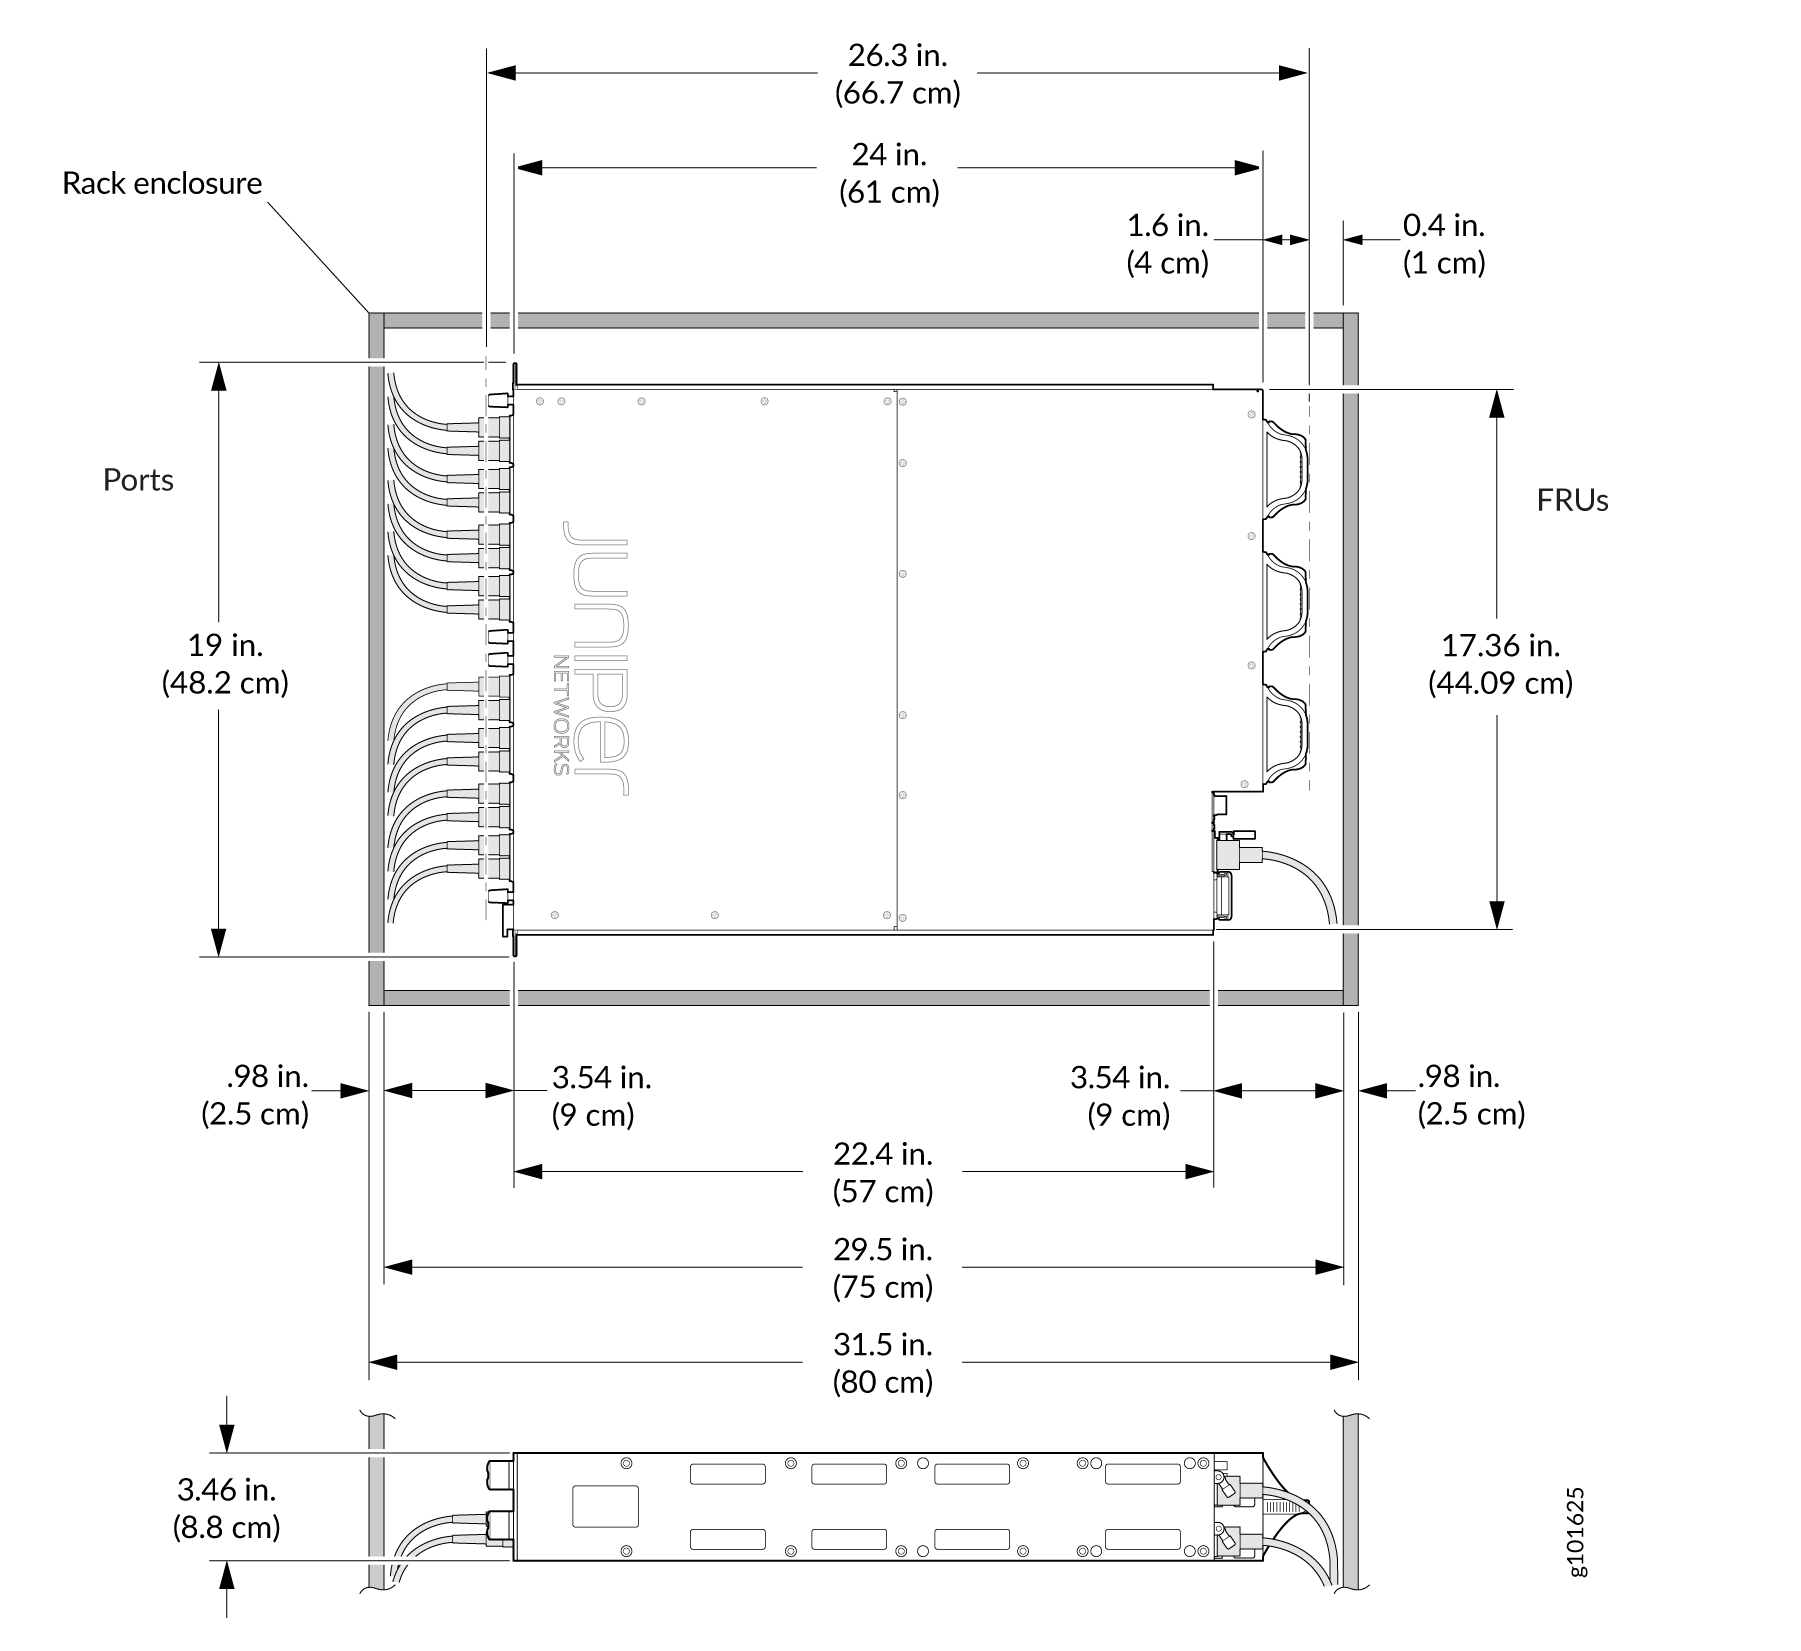 MX304 Chassis Dimensions and Clearance Requirements (for a Rack Enclosure)